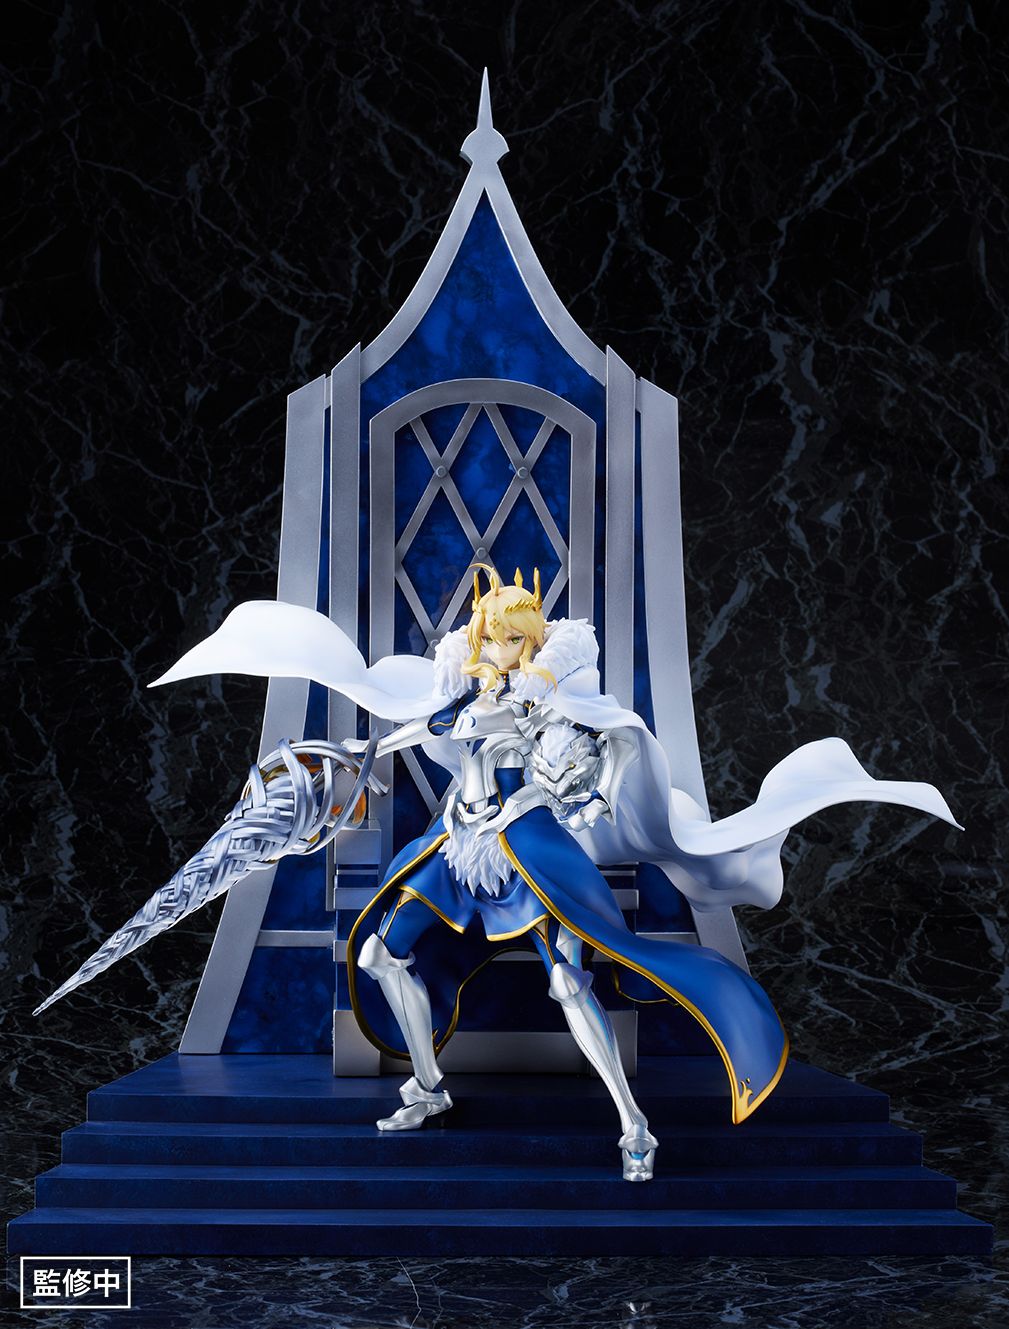 THE LION KING 1/7 Scale Figure Fate/Grand Order THE MOVIE Divine Realm of the Round Table: Camelot SHIBUYA SCRANBLE FIGURE